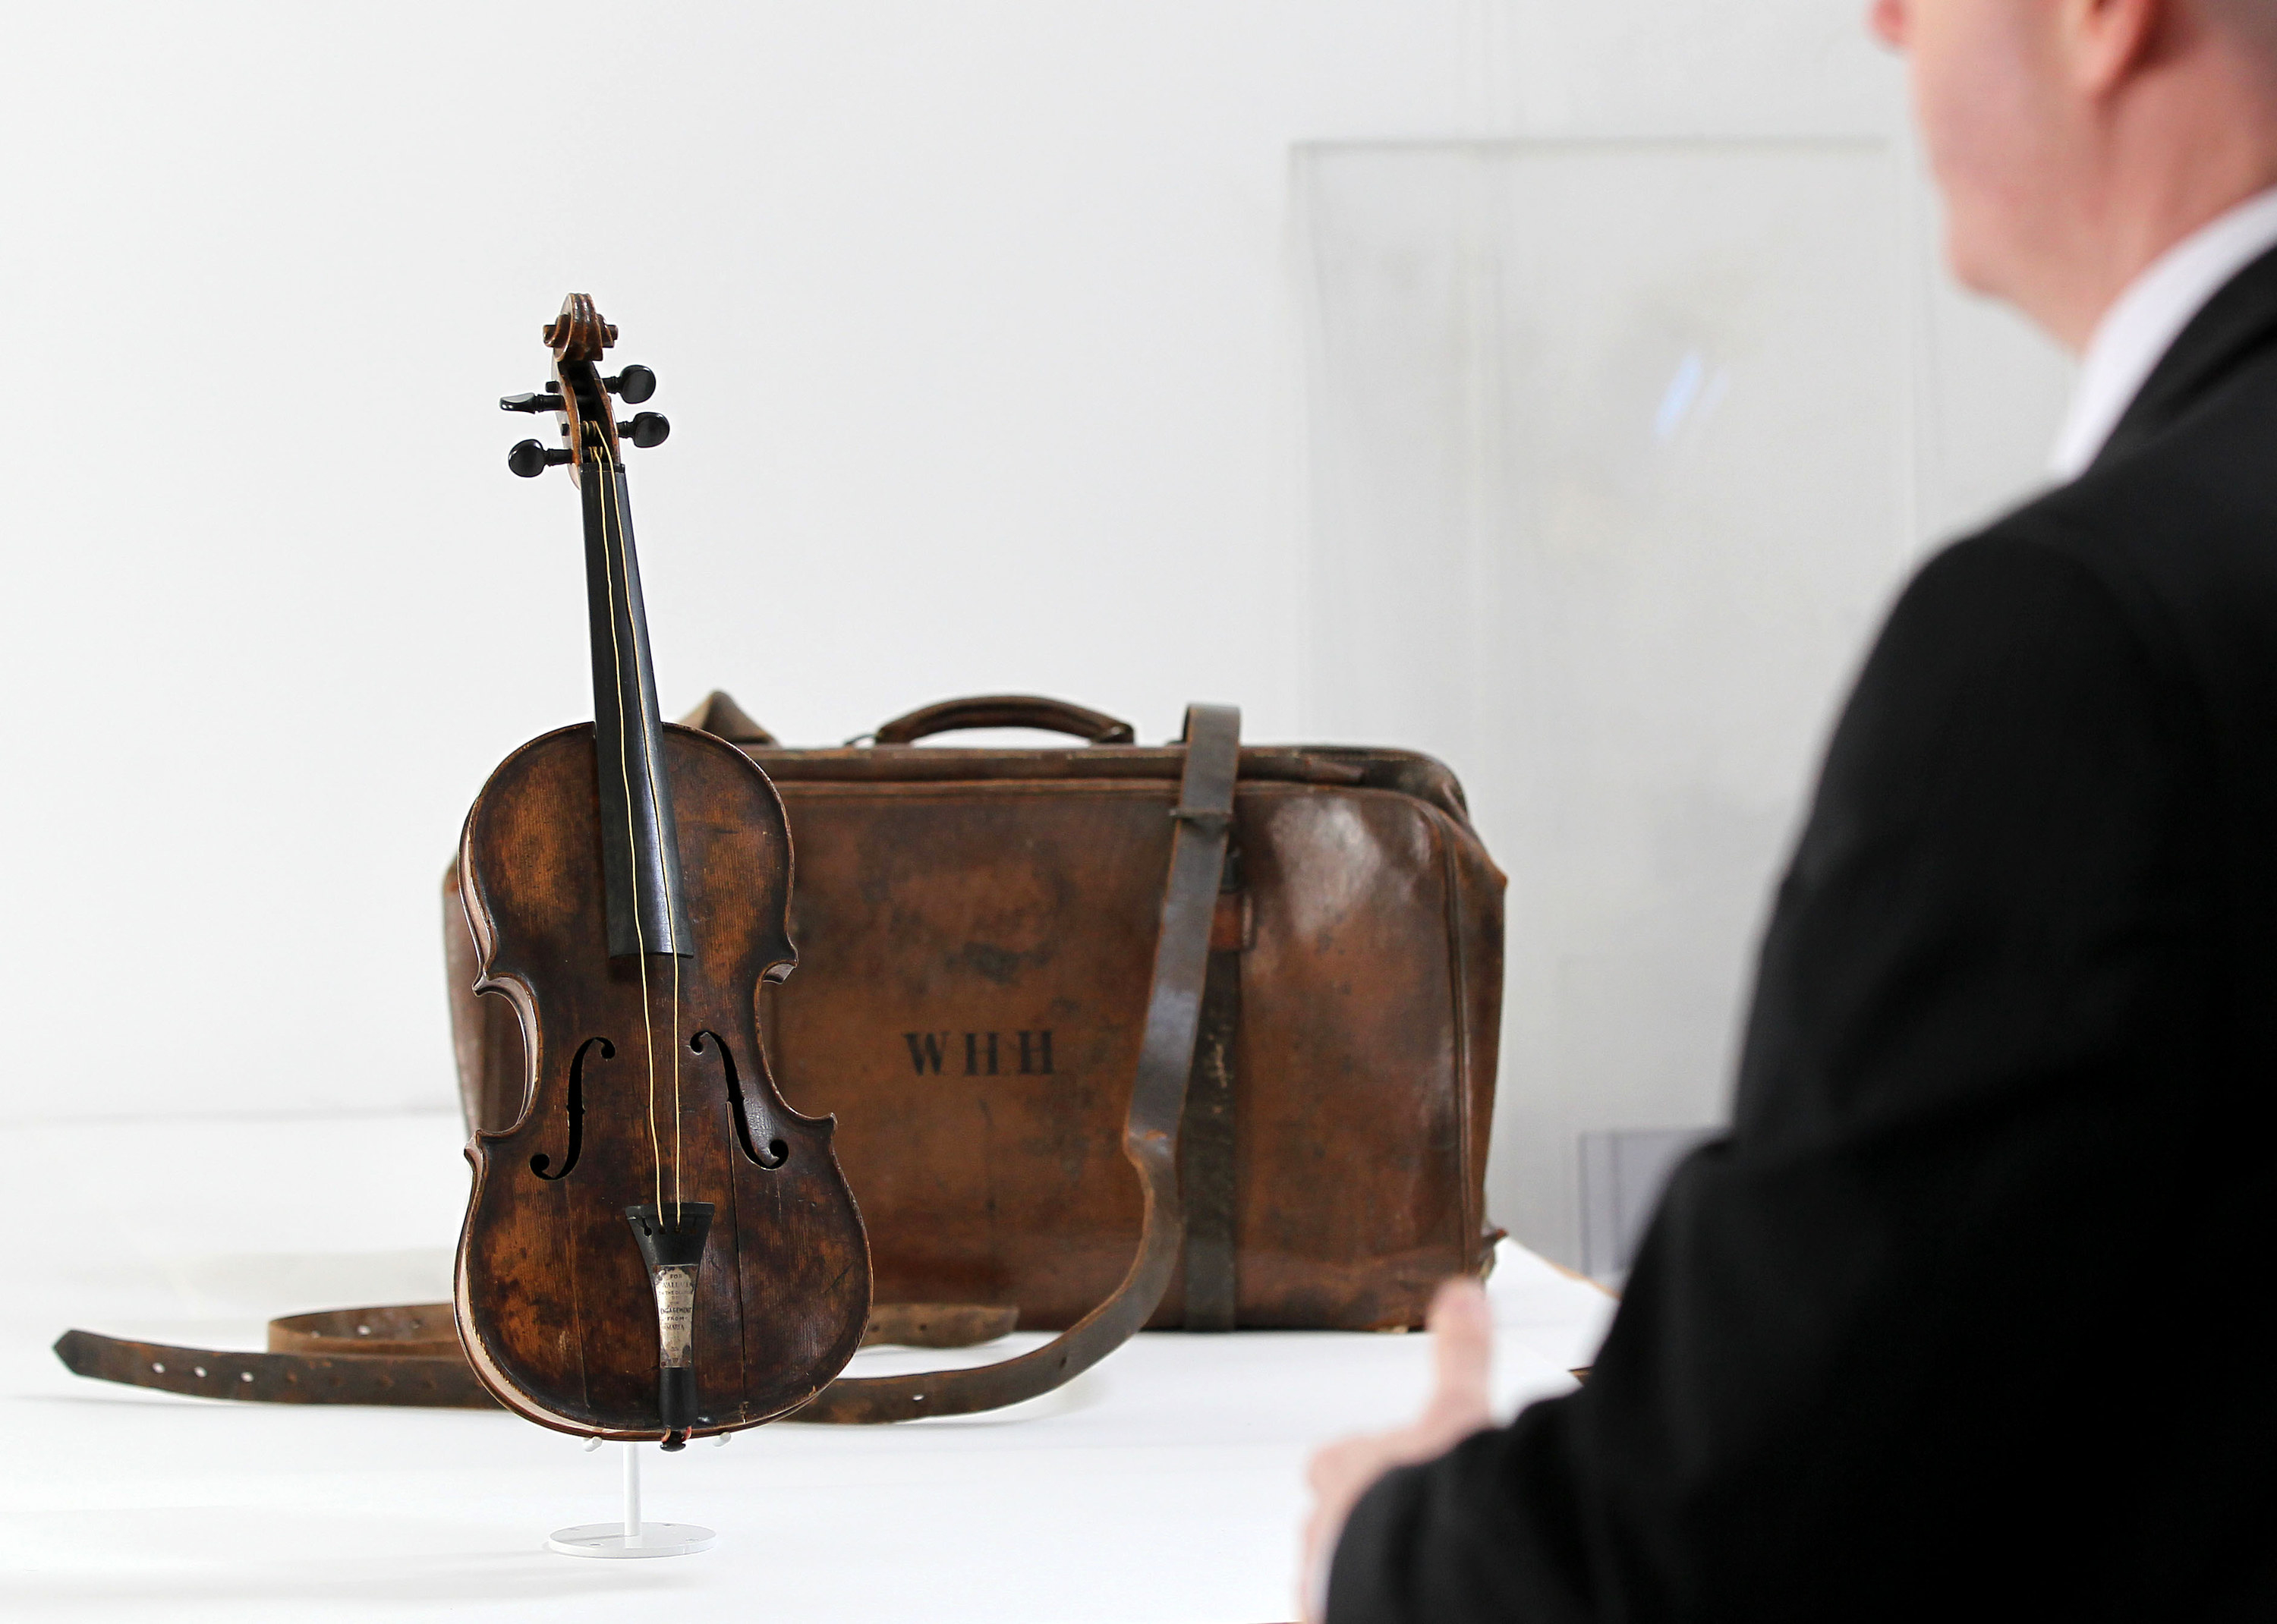 An old violin on display in a museum